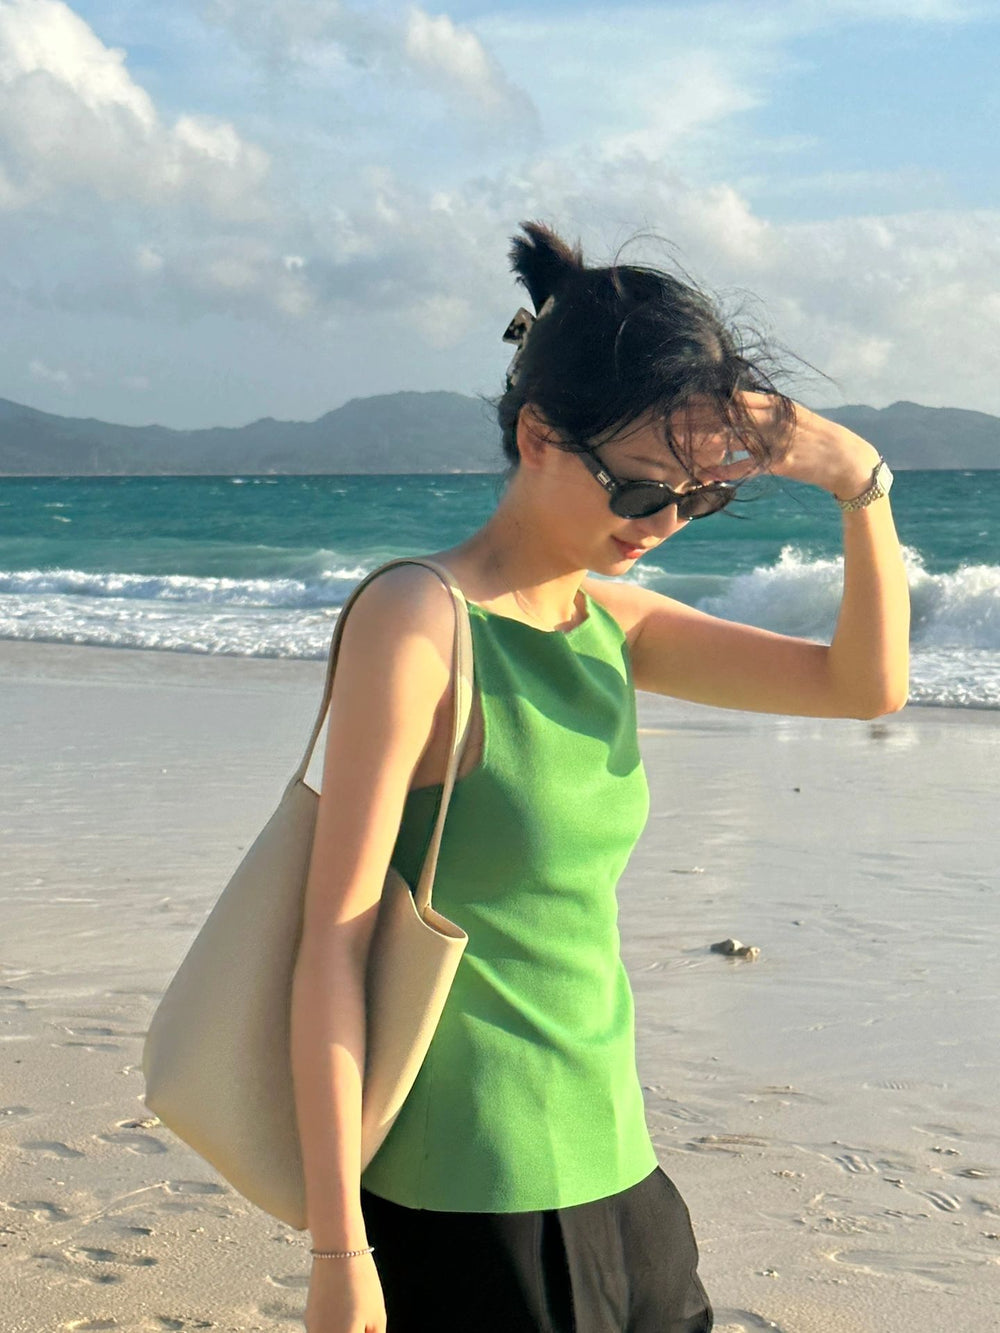 Radiating grace and style, a woman wearing a stunning green top and fashionable sunglasses leisurely walks along the serene beach, enjoying the tranquil surroundings.